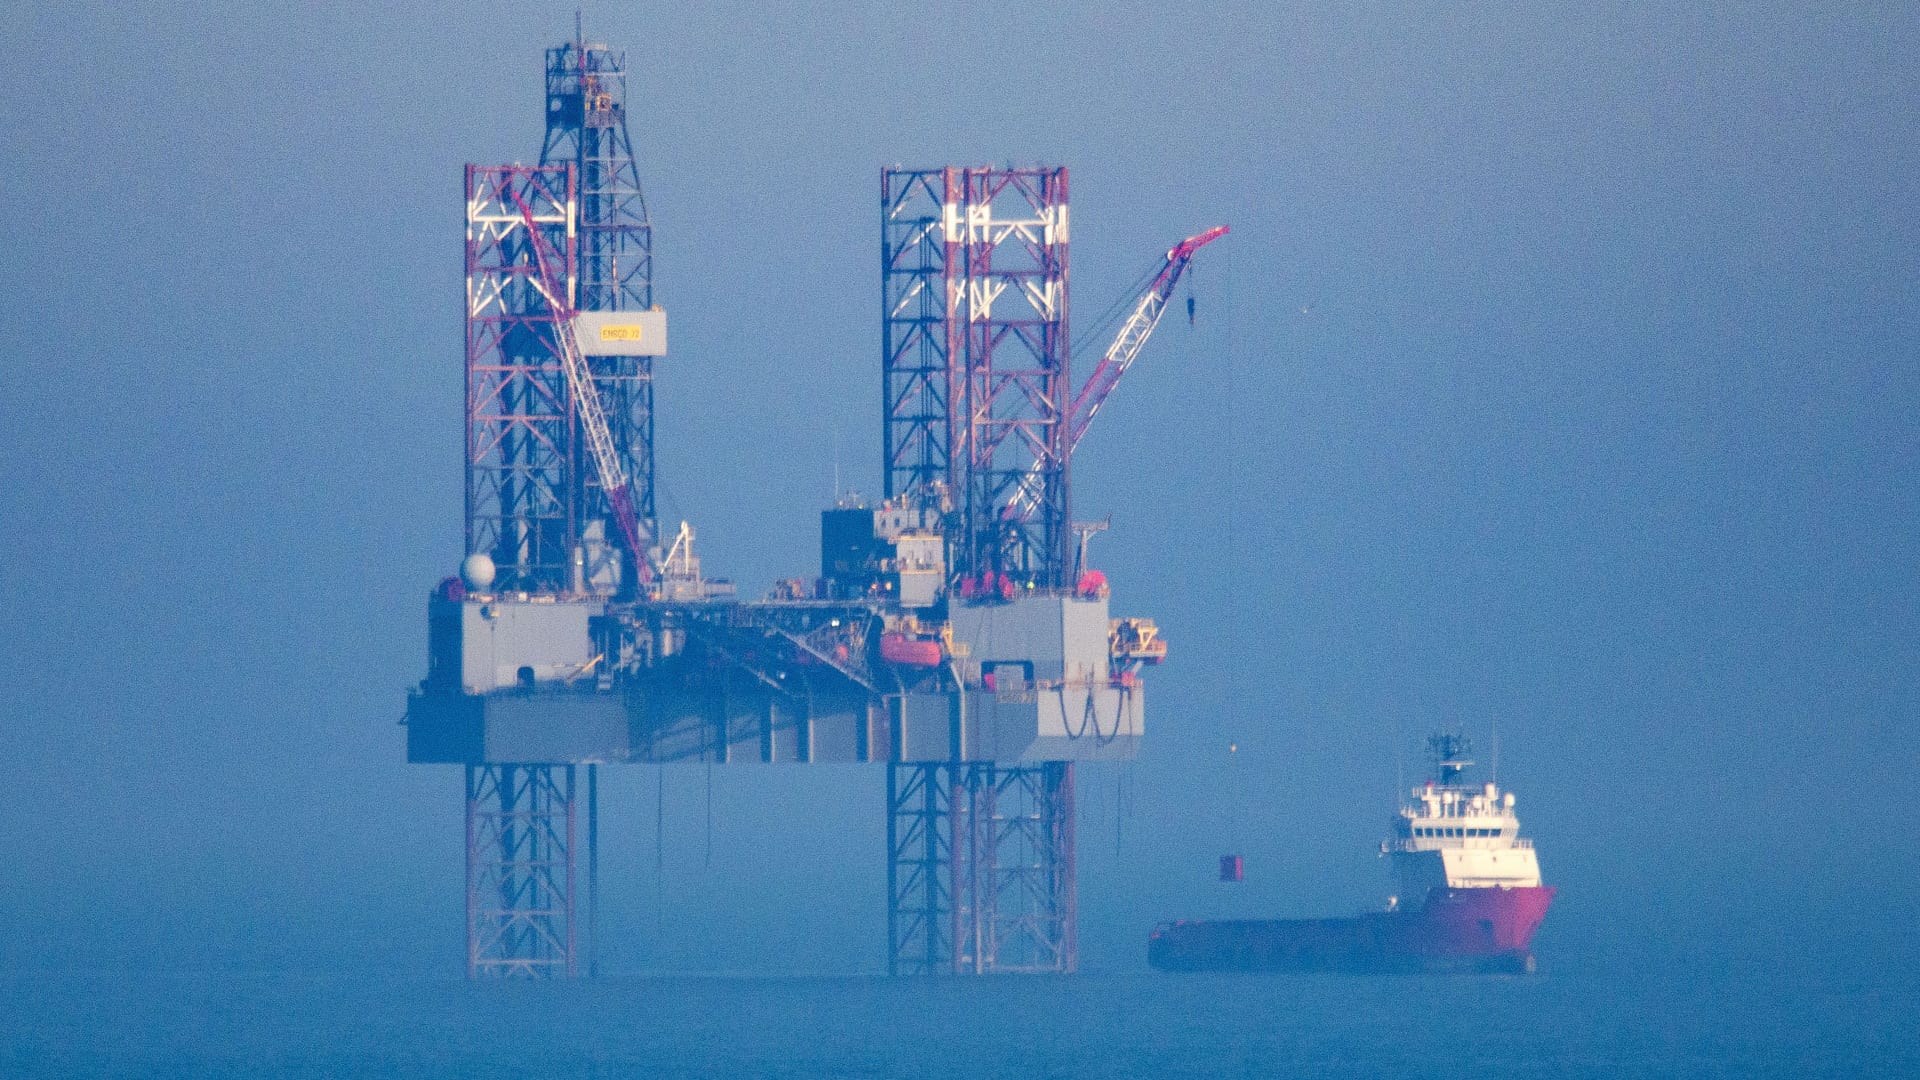 ENSCO-72 drilling rig working in Poole Bay for Corallian Energy in Poole Bay, England, on Feb. 15, 2019.